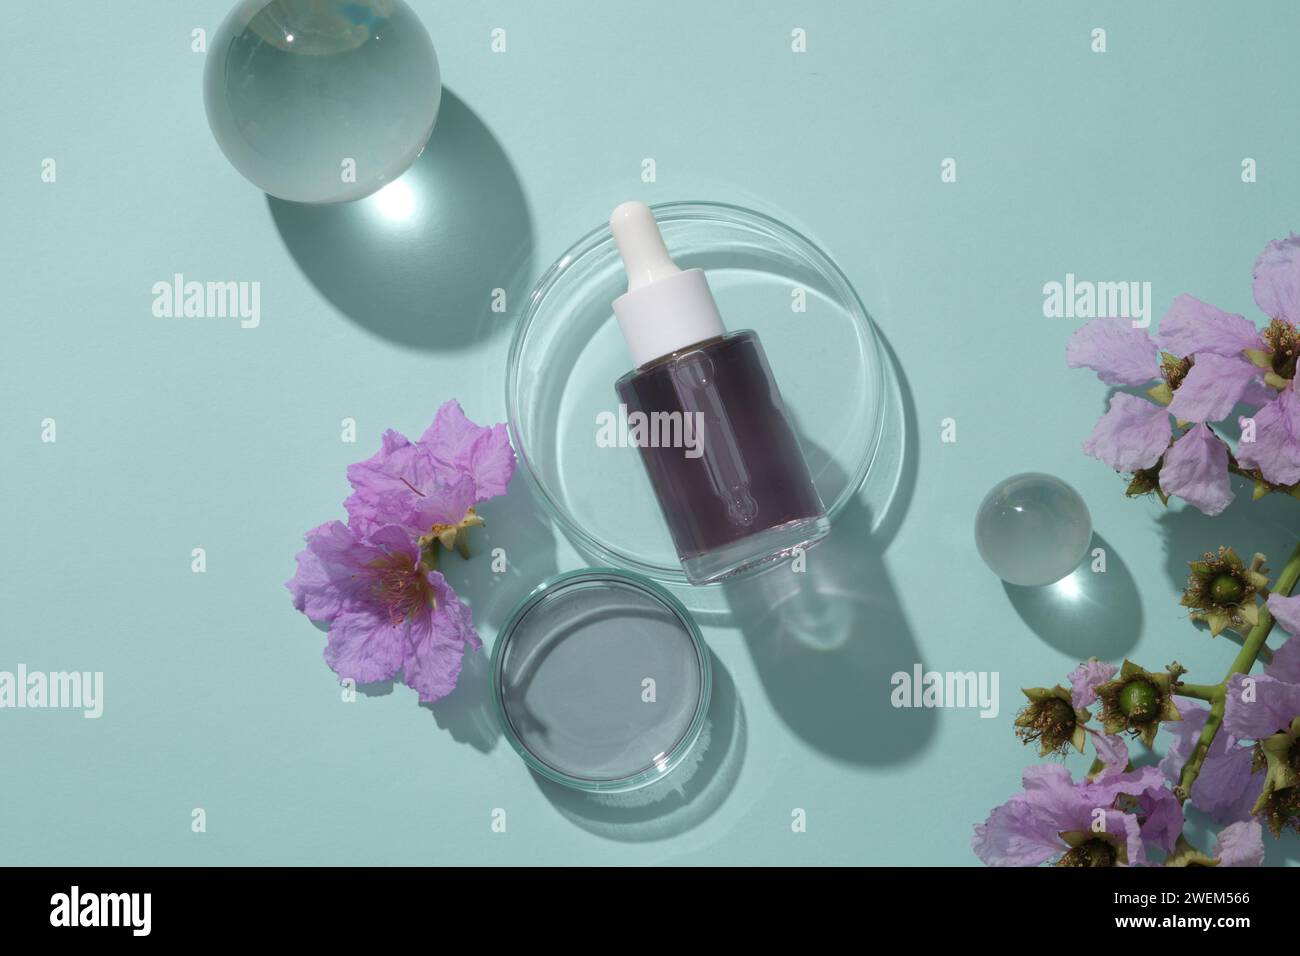 Concept for promote cosmetic with beauty flower - bottle with dropper cap filled purple liquid on transparent podium, glass balls and purple flowers d Stock Photo